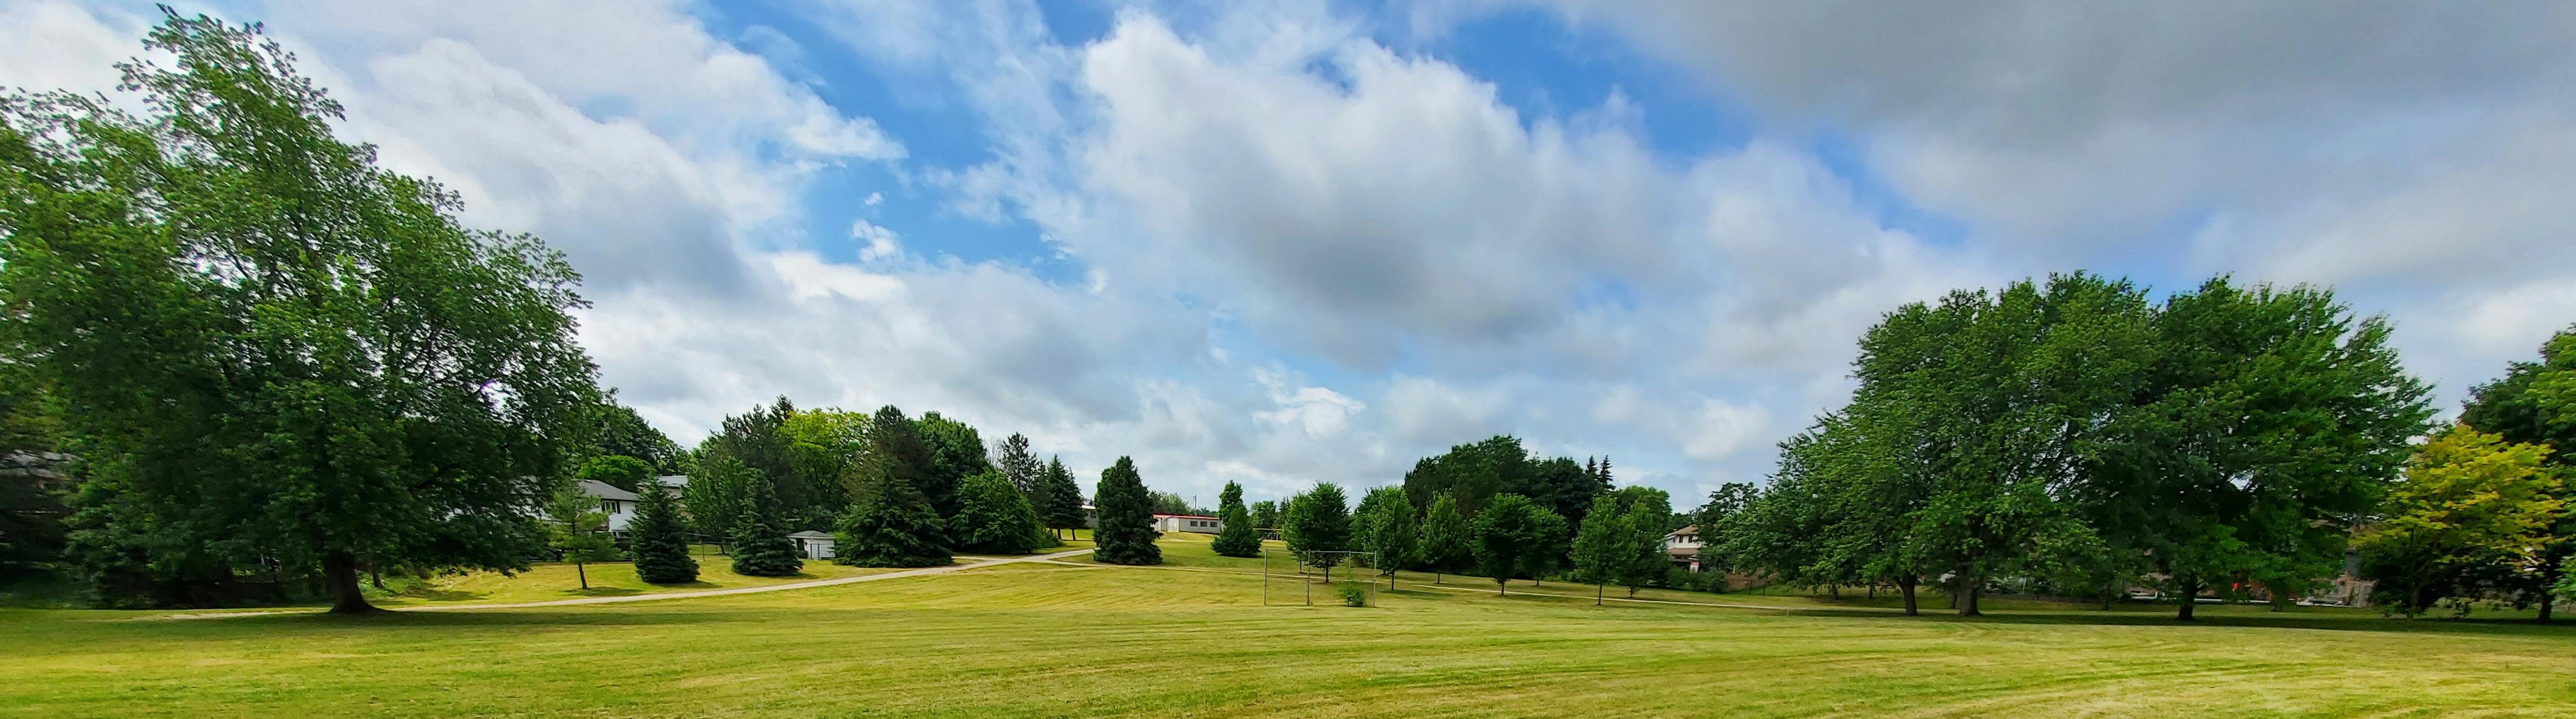 Field with trees, path, blue sky and clouds in distance. A few houses can be seen beyond the trees. 